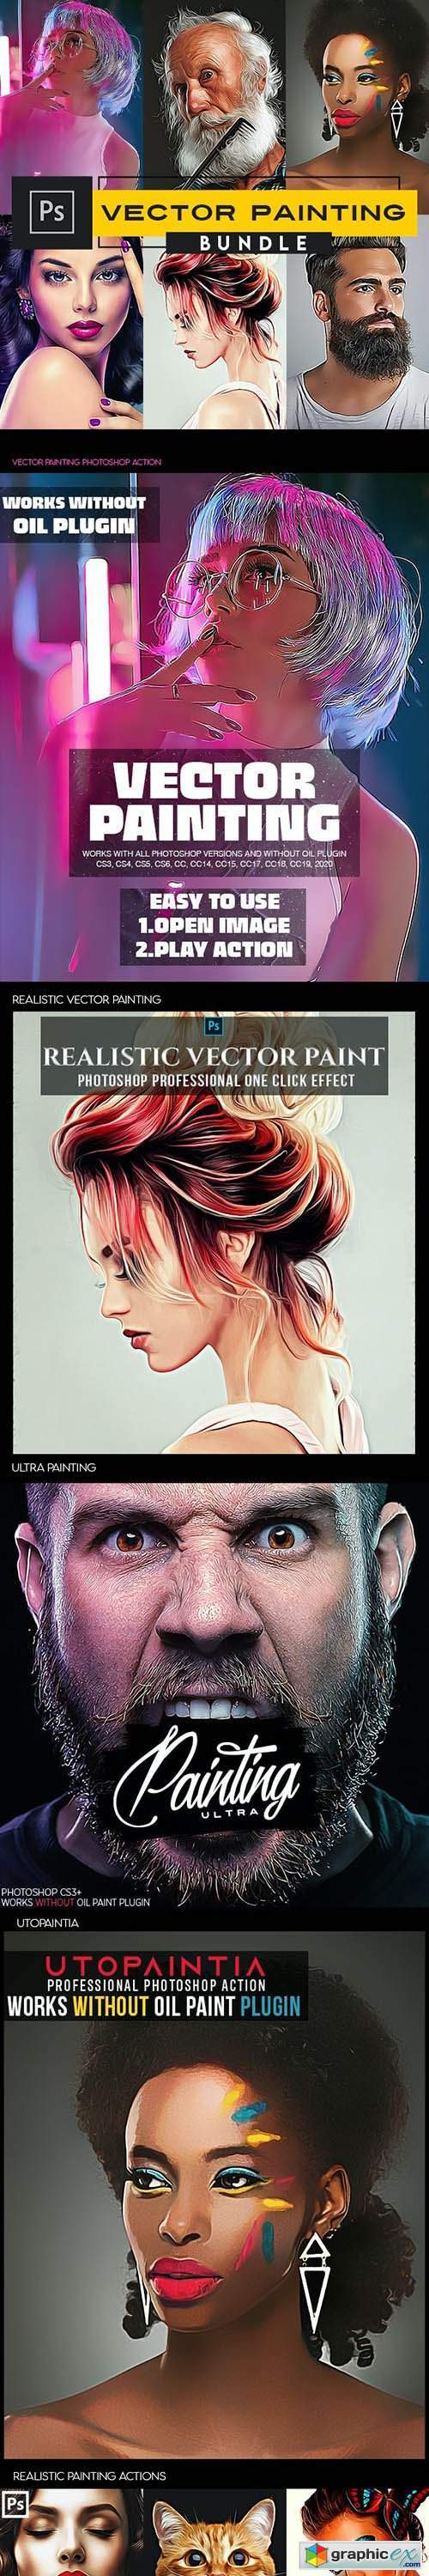 Vector Painting Photoshop Actions » Free Download Vector Stock Image ...